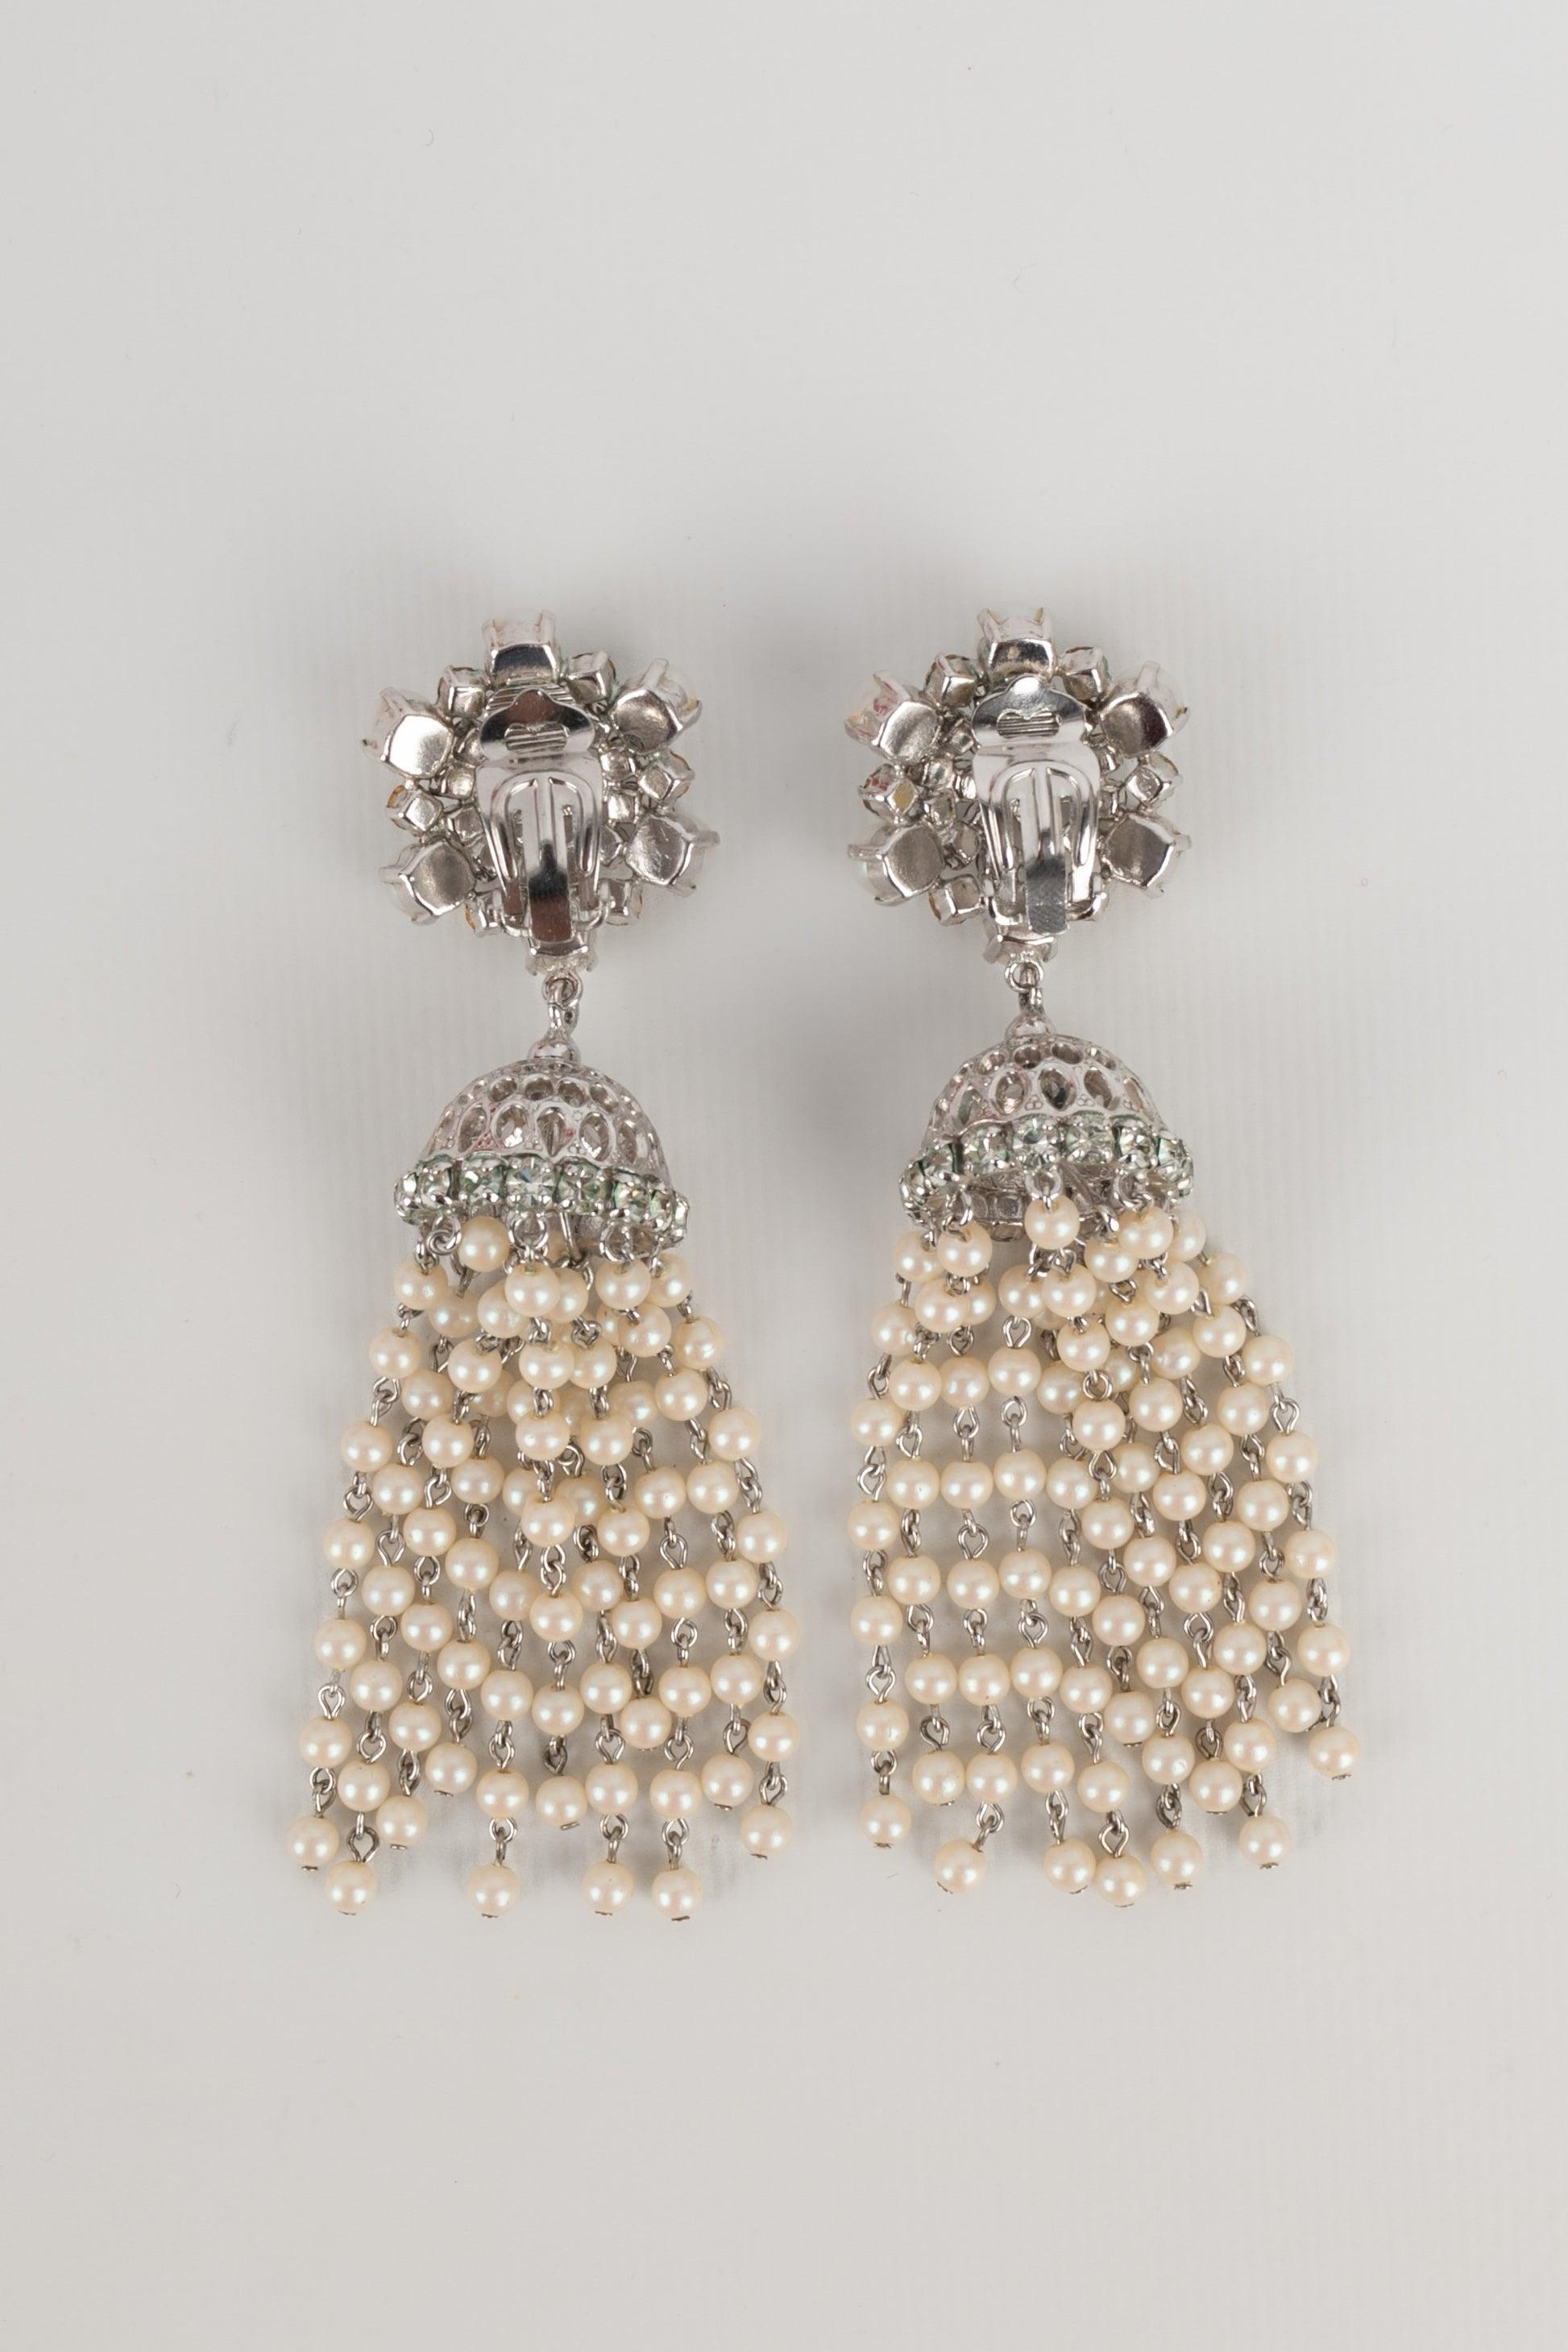 Dior - Silvery metal earrings ornamented with rhinestones holding a costume pearl pompom. 1970 Collection.

Additional information:
Condition: Very good condition
Dimensions: Height: 10 cm
Period: 20th Century

Seller Reference: BO160